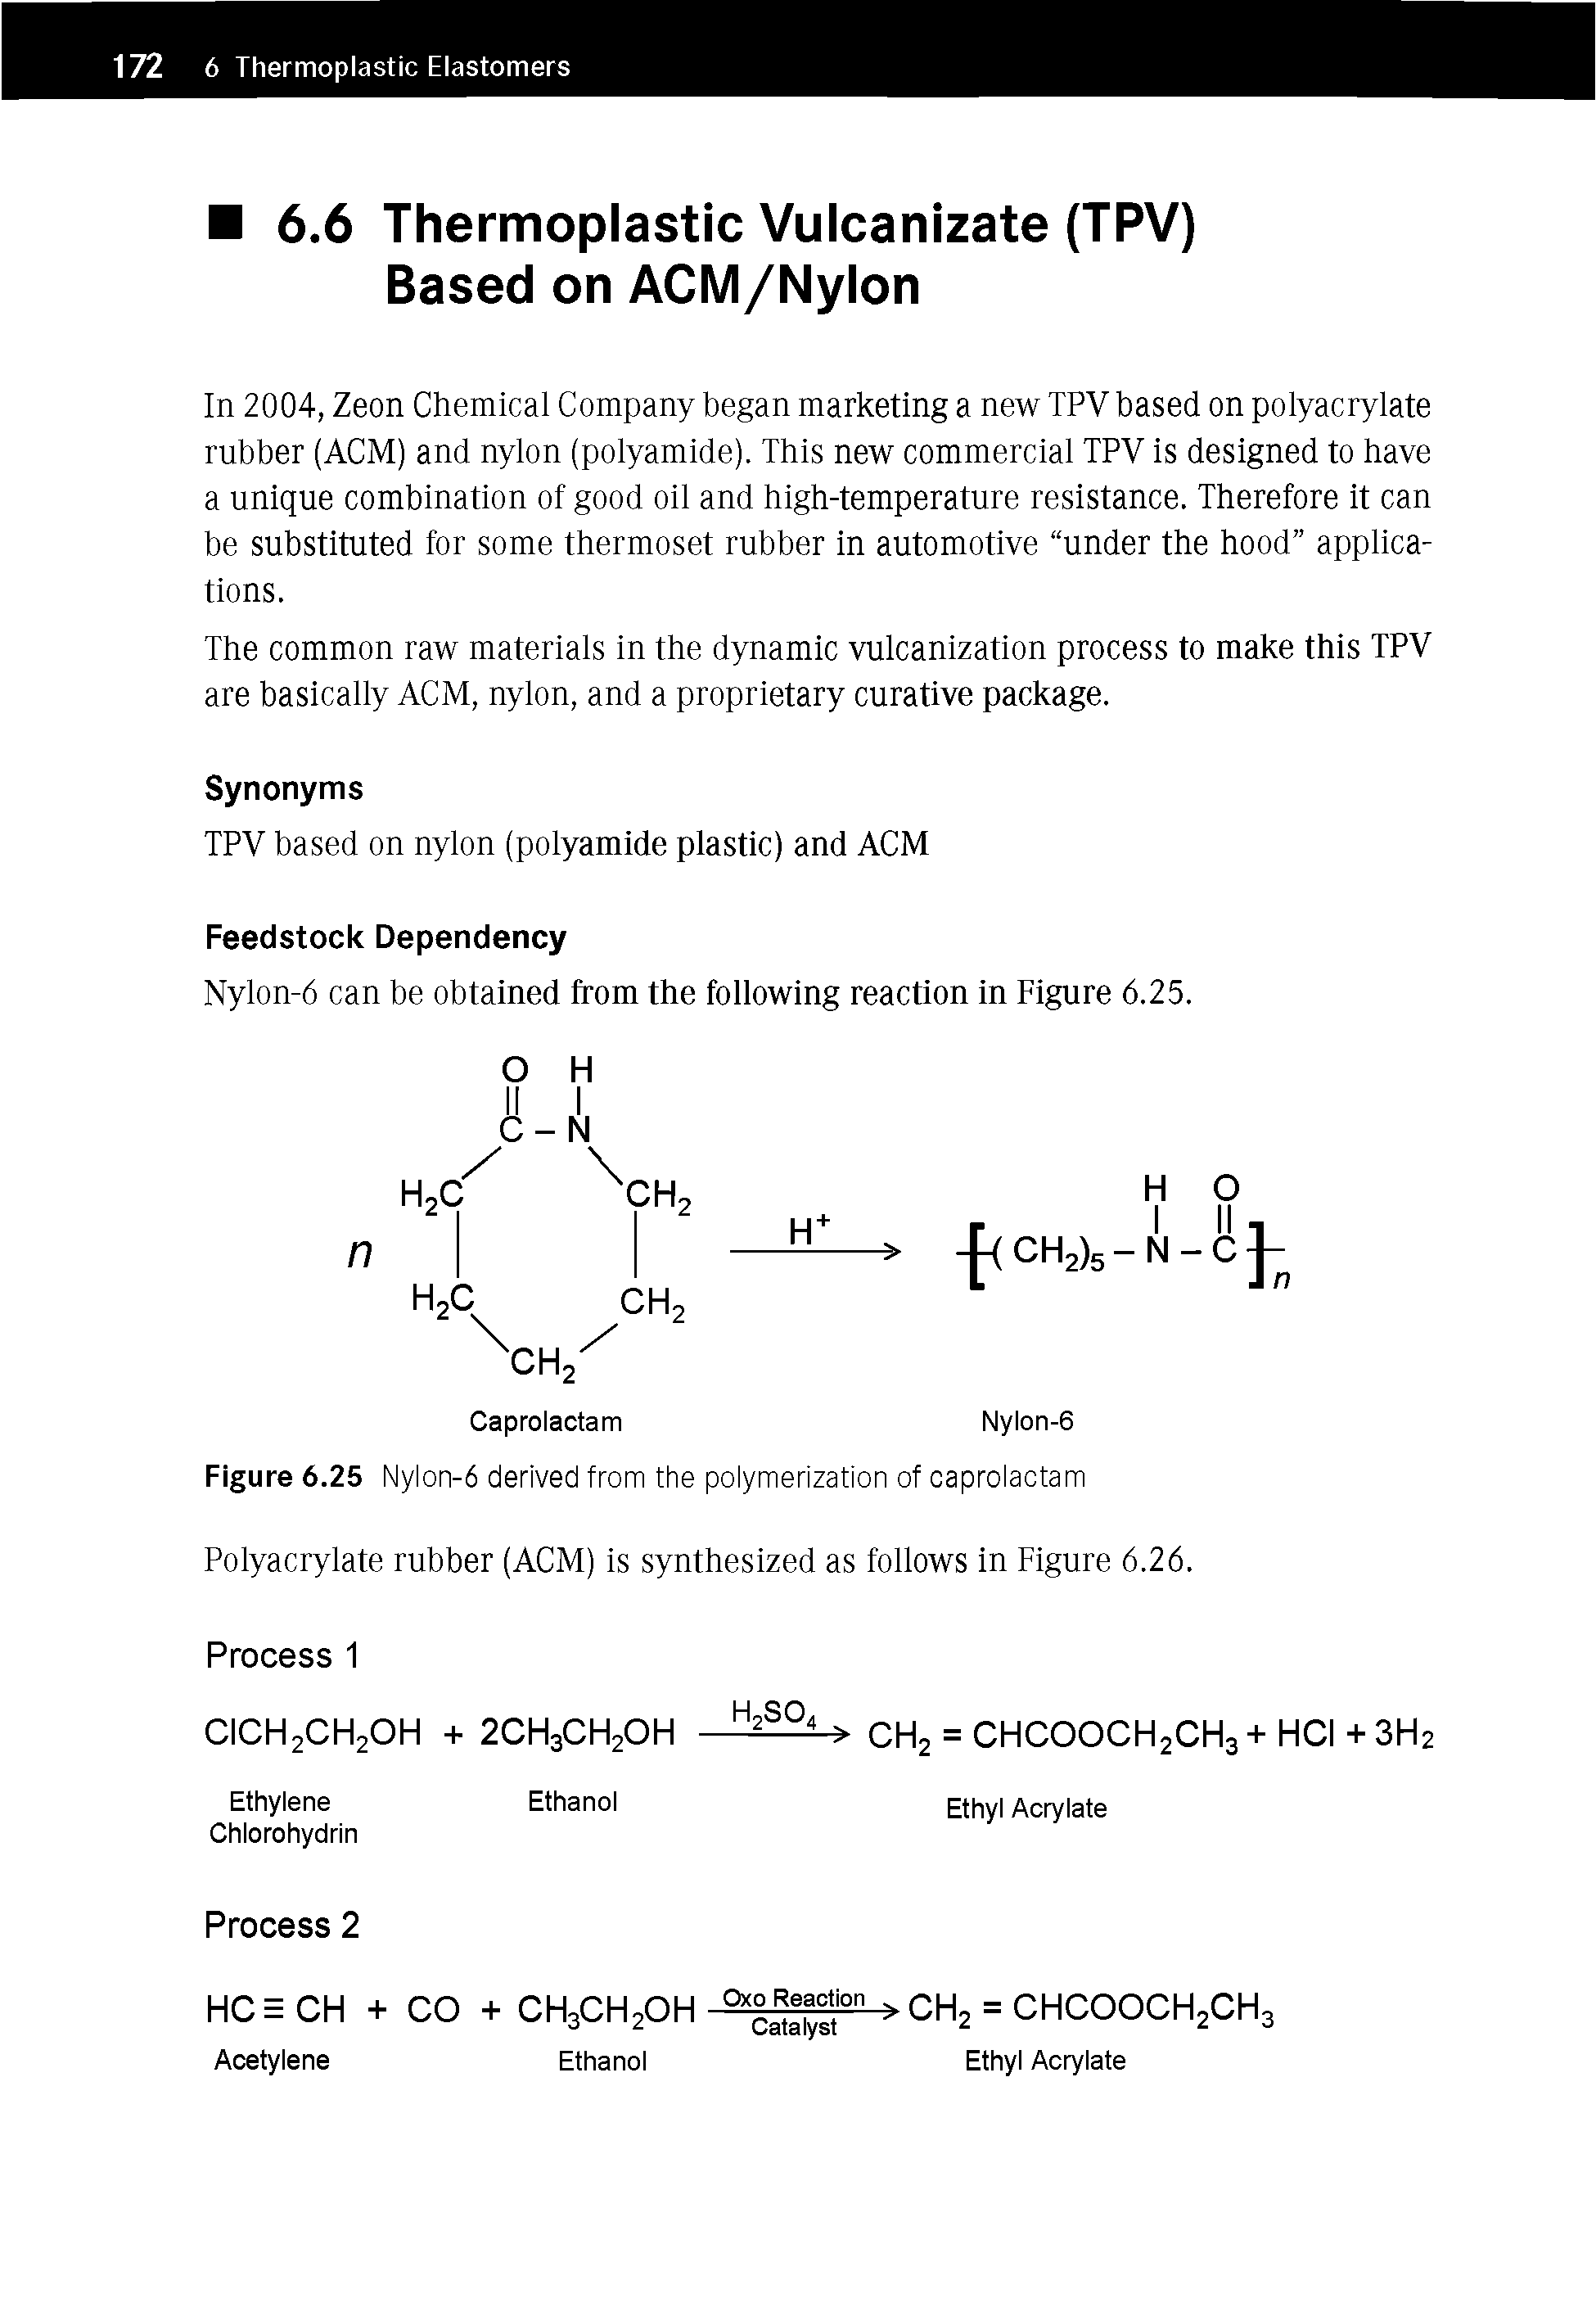 Figure 6.25 Nylon-6 derived from the polymerization of caprolactam Polyacrylate rubber (ACM) is synthesized as follows in Figure 6.26.